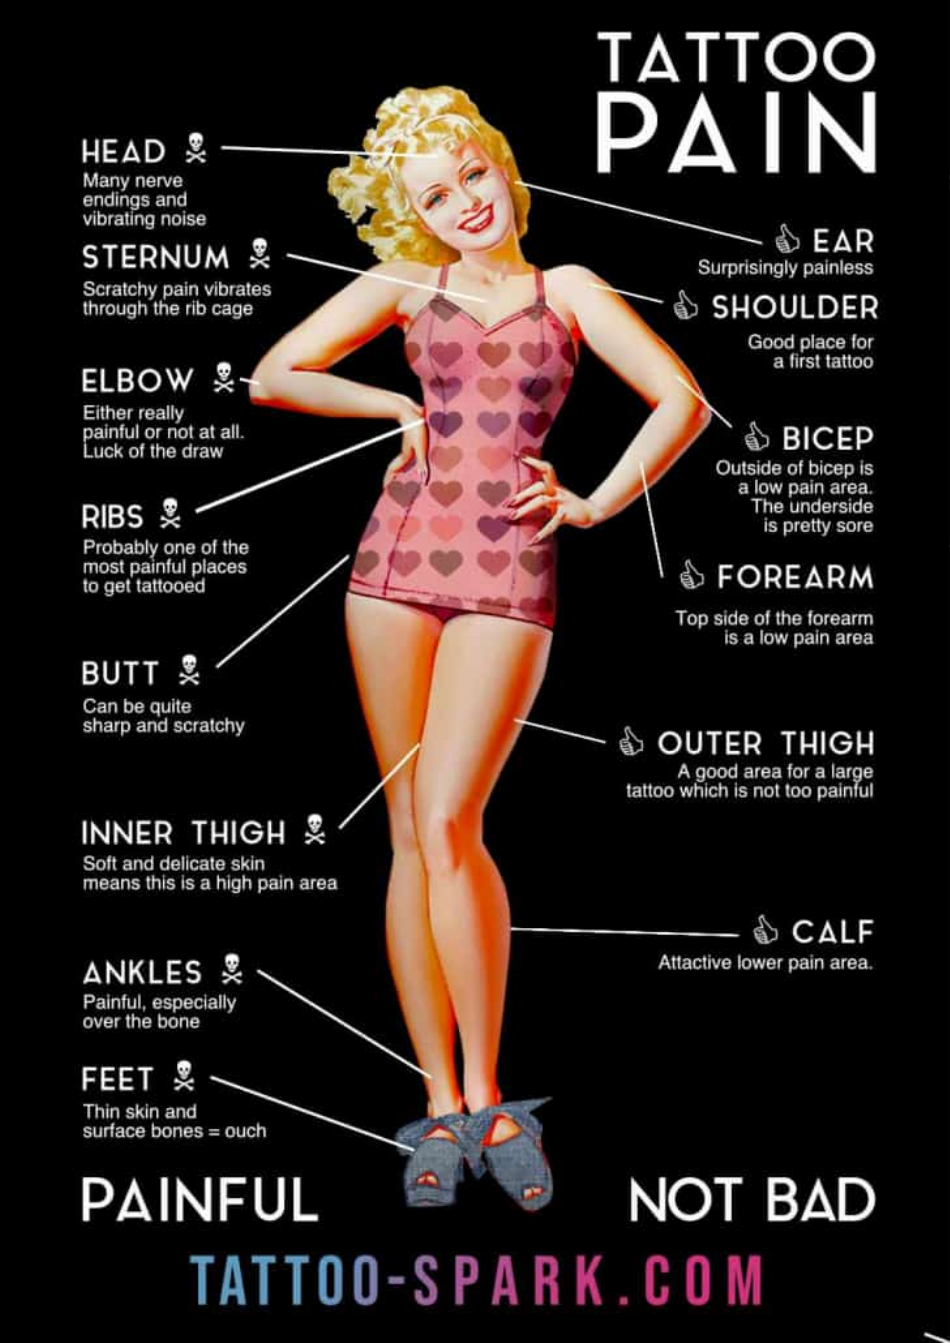 Beautiful woman displaying tattoo pain chart, showing which areas of the body are more or less painful to tattoo.